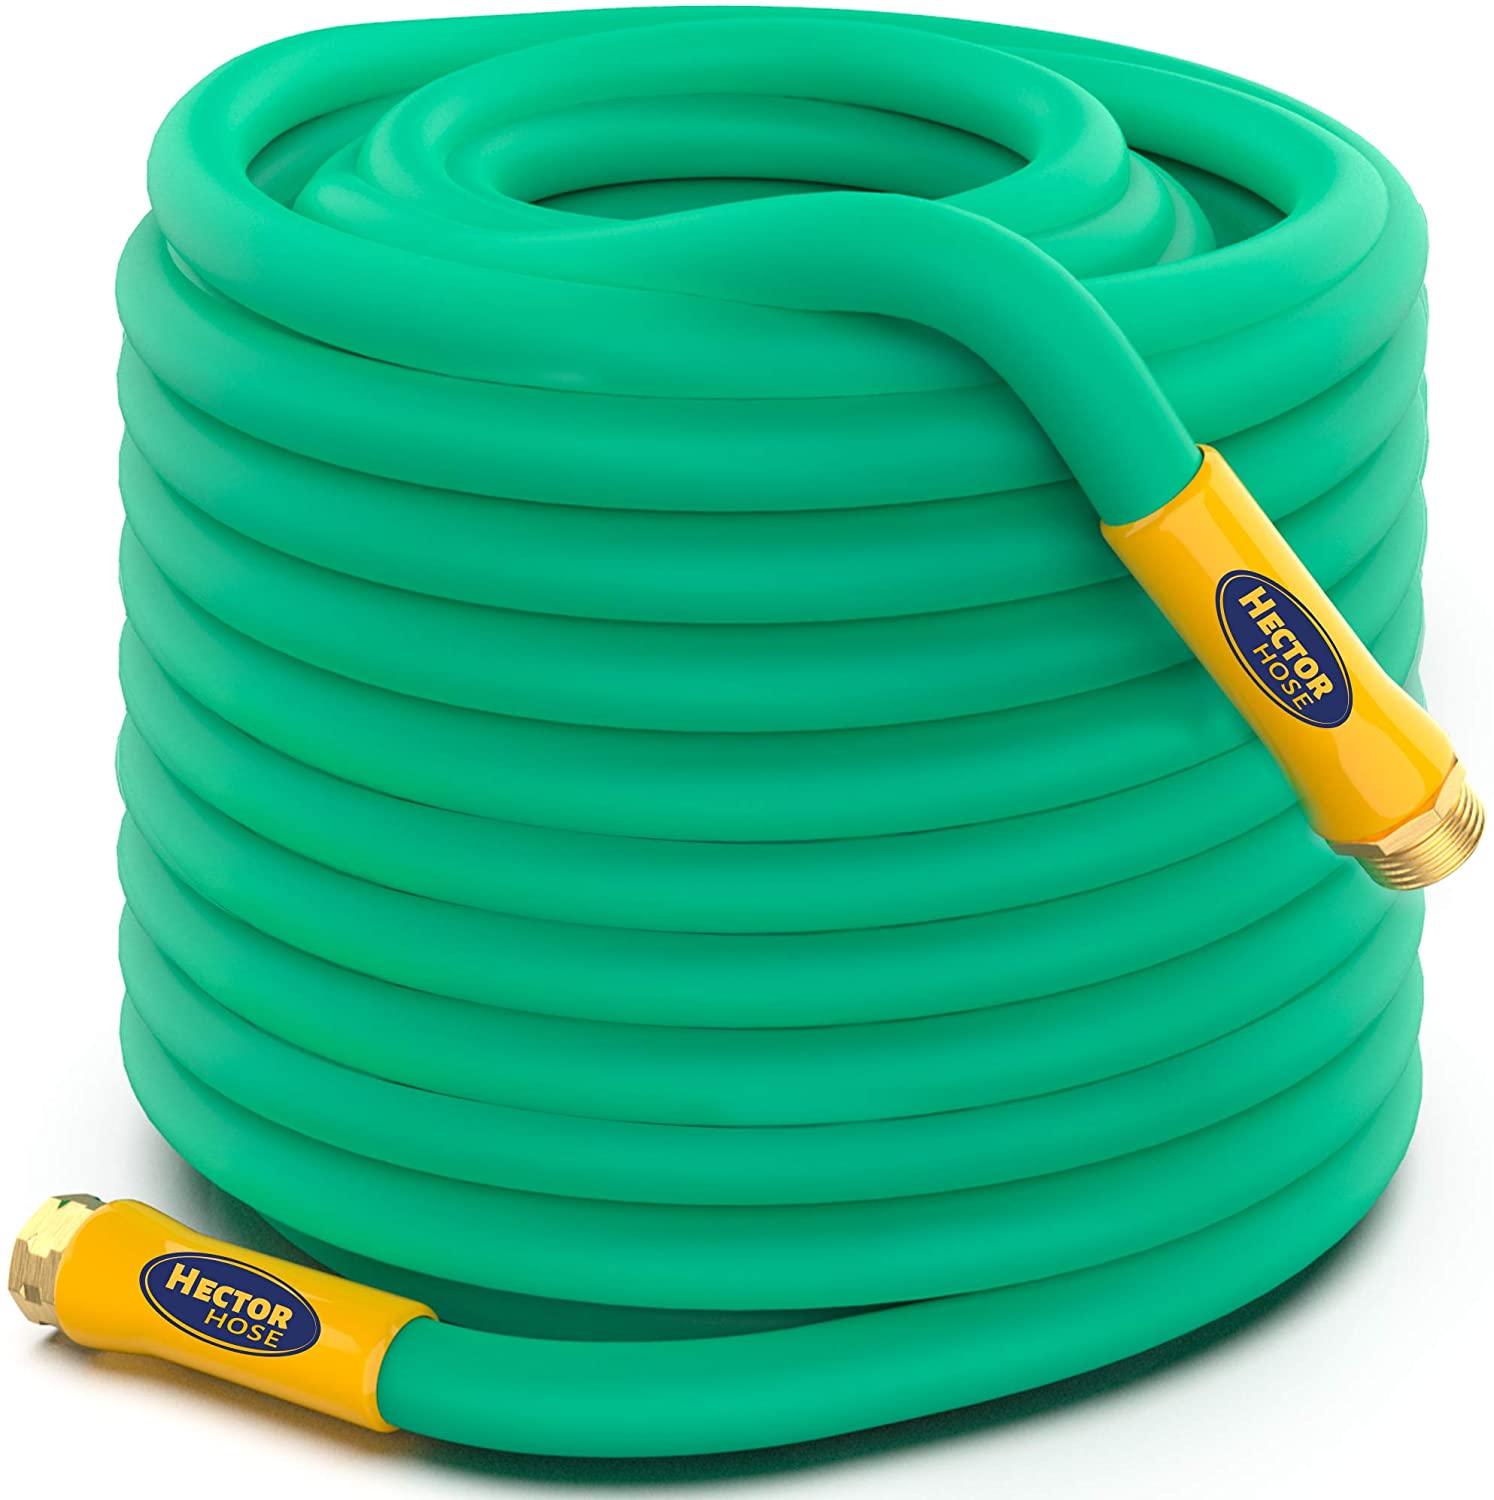 Drinking Water Garden Hose Safe with Solid Brass Fittings - Burst Strenght 500 psi Leak-Free 3 Layers - Lazy Pro